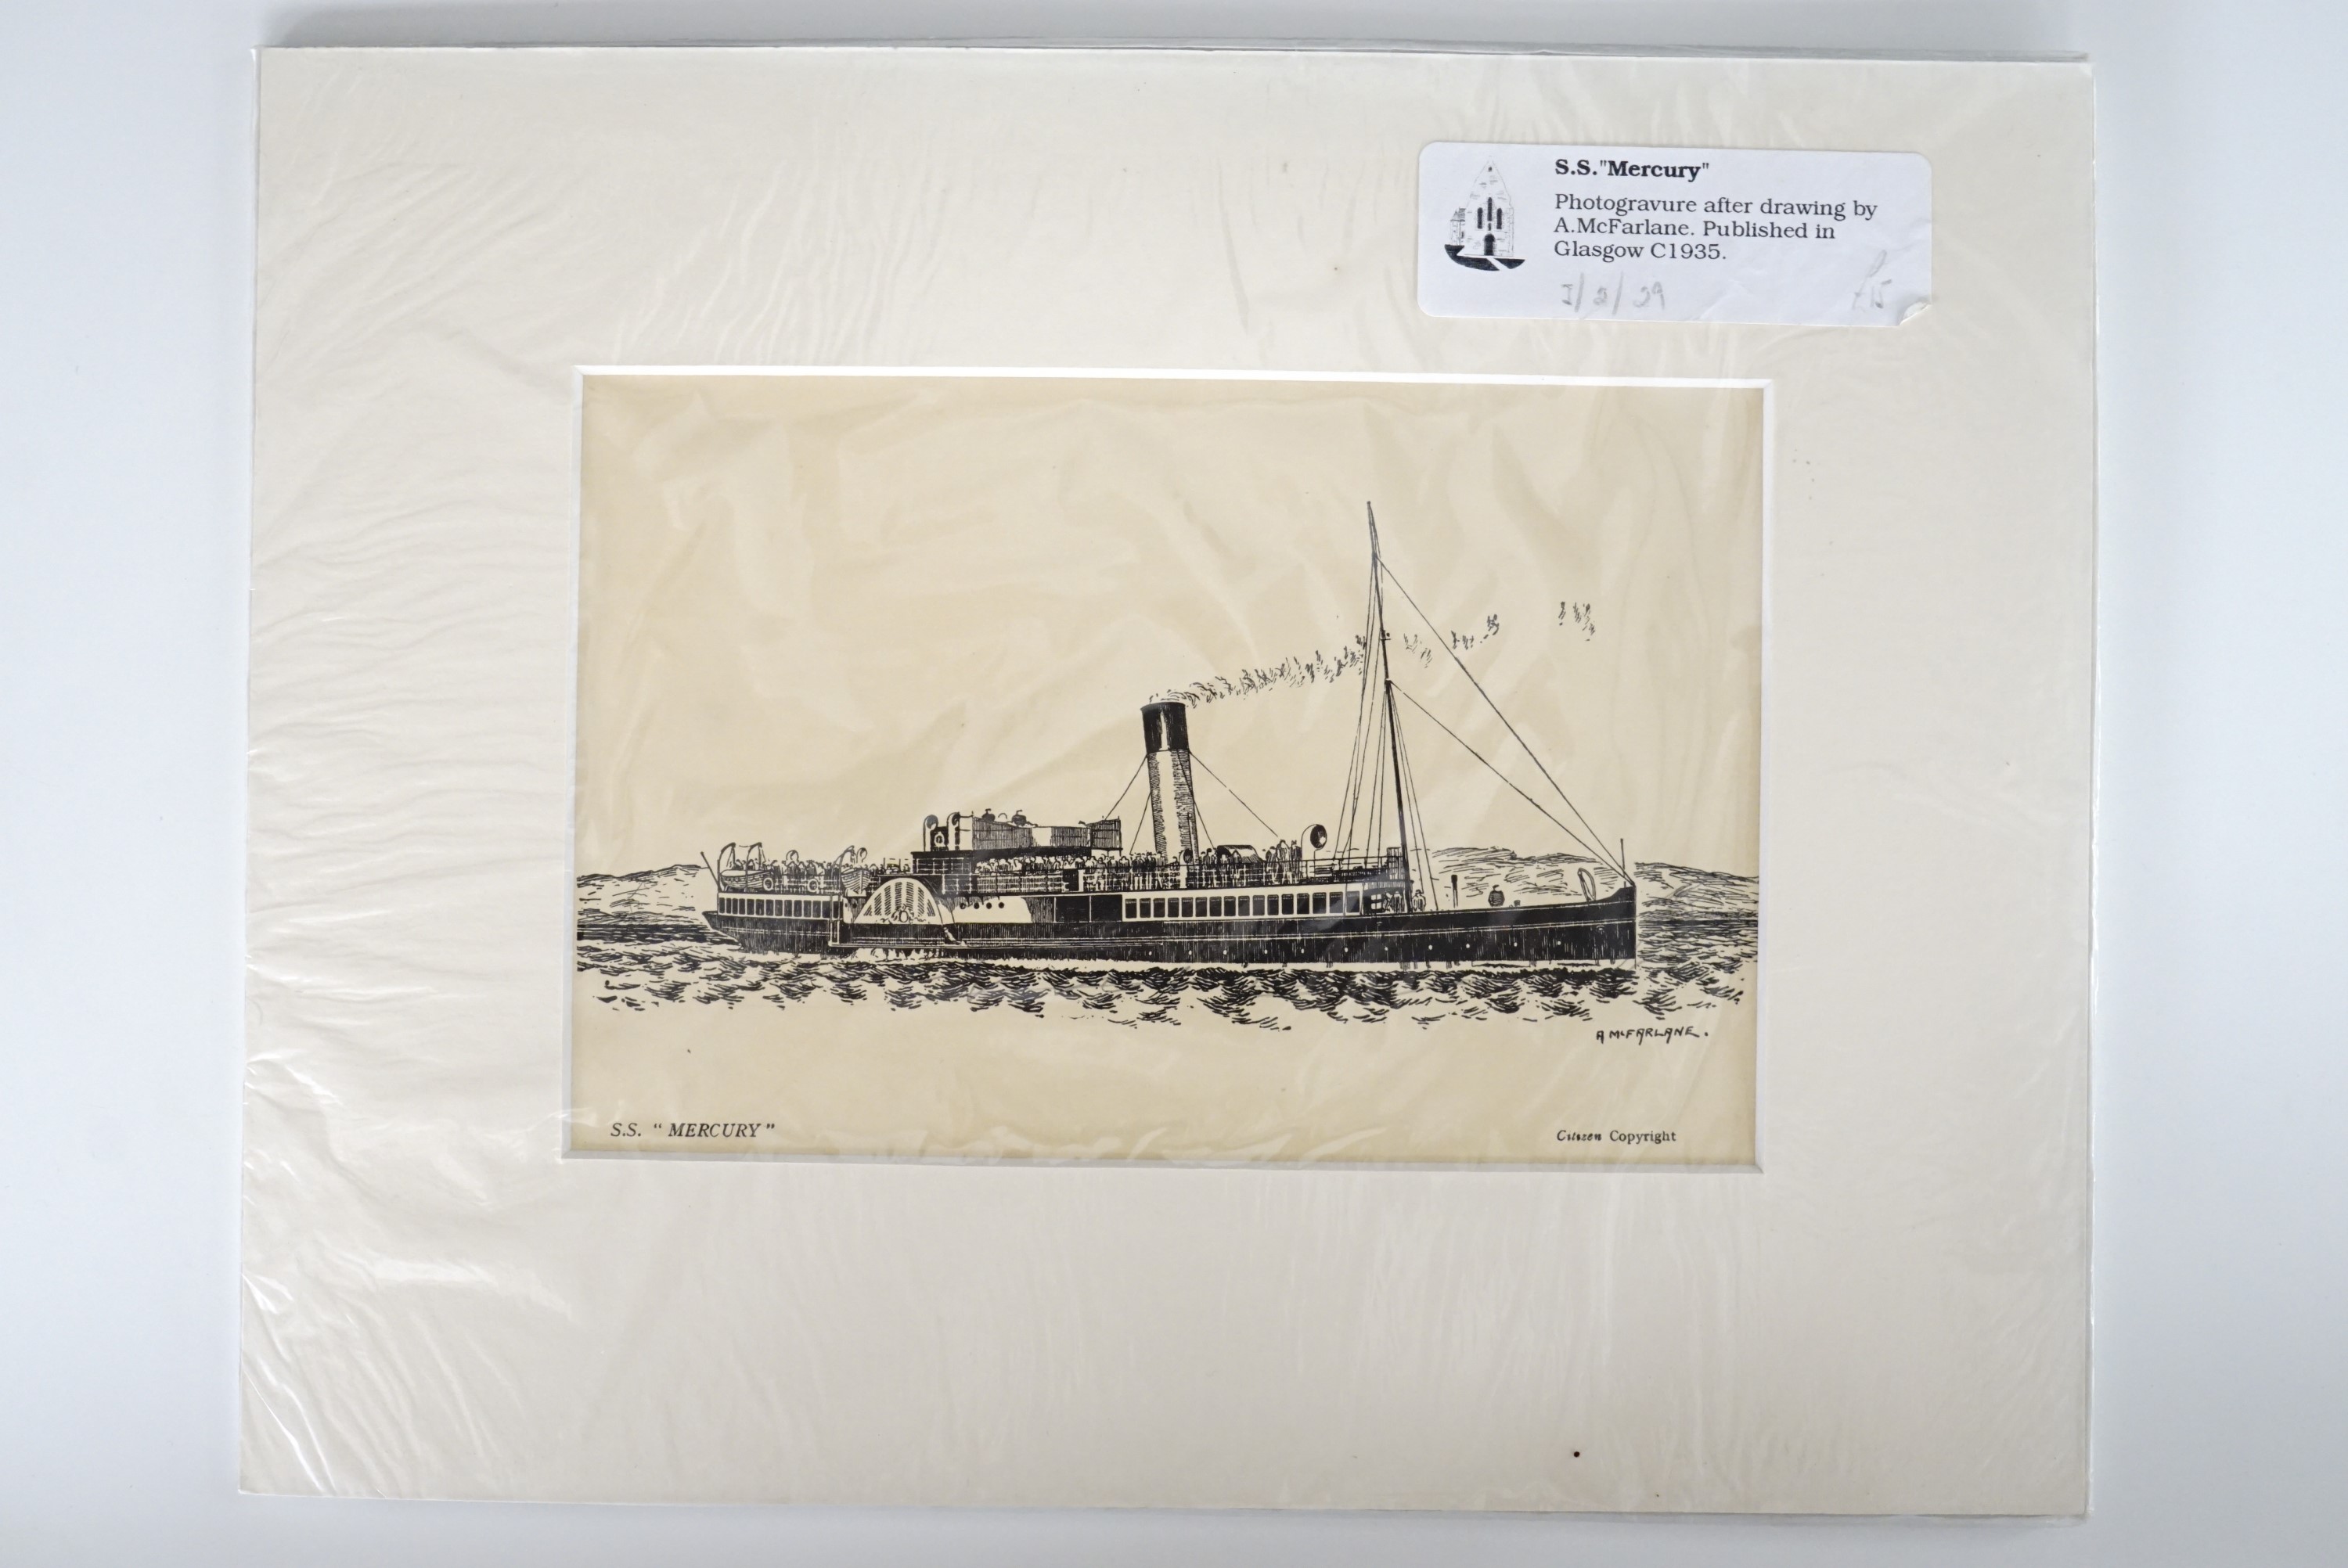 After A McFarlane (20th Century) A series of seven photogravure prints depicting cruise ships, - Image 6 of 7